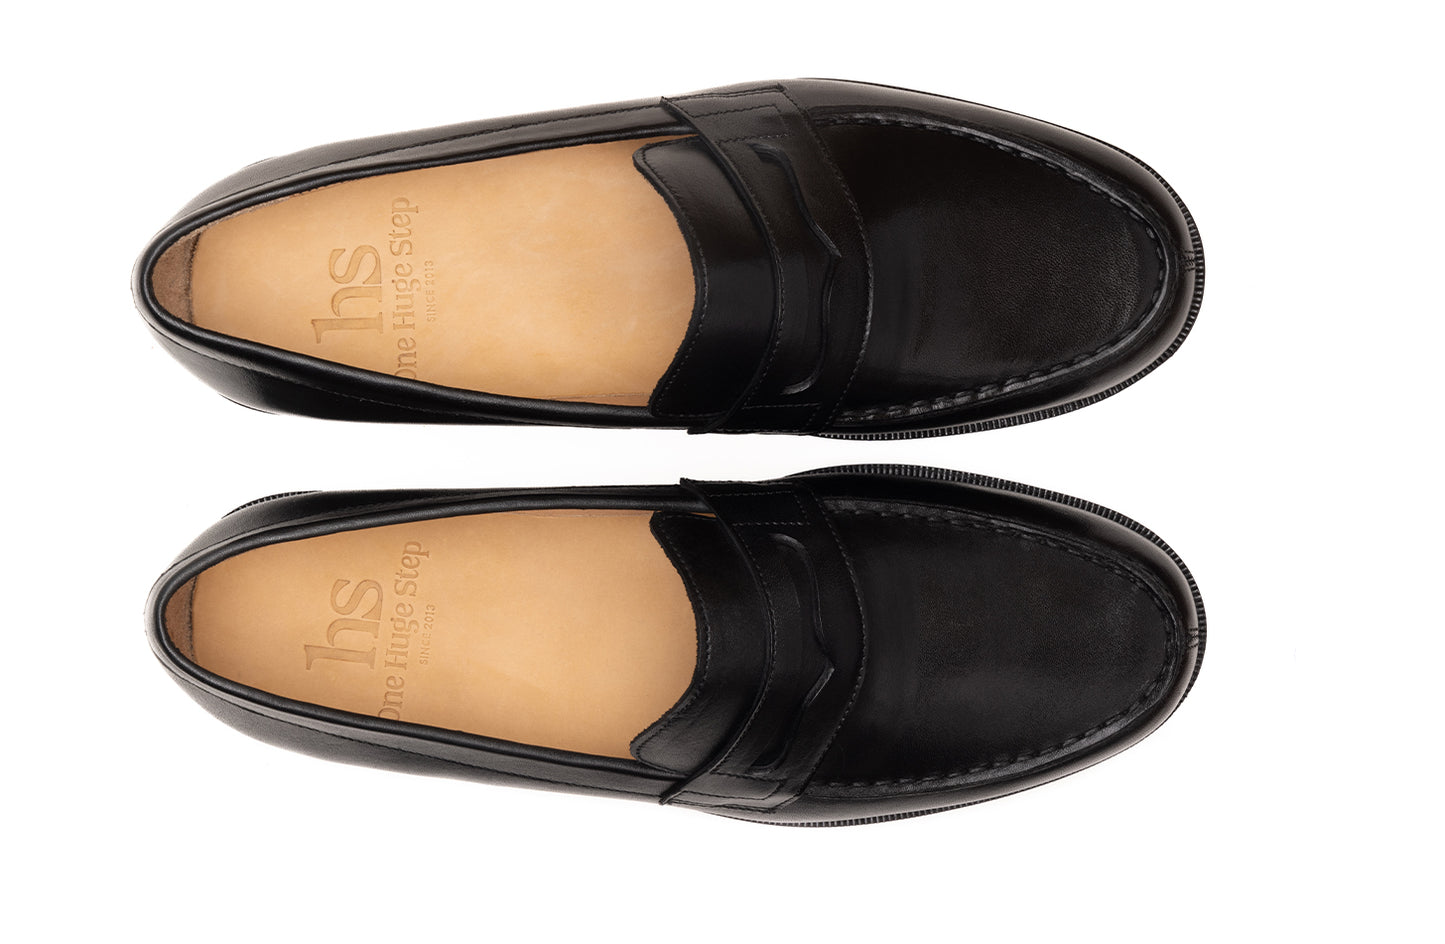 Split toe Penny Loafer with hand-stitched apron